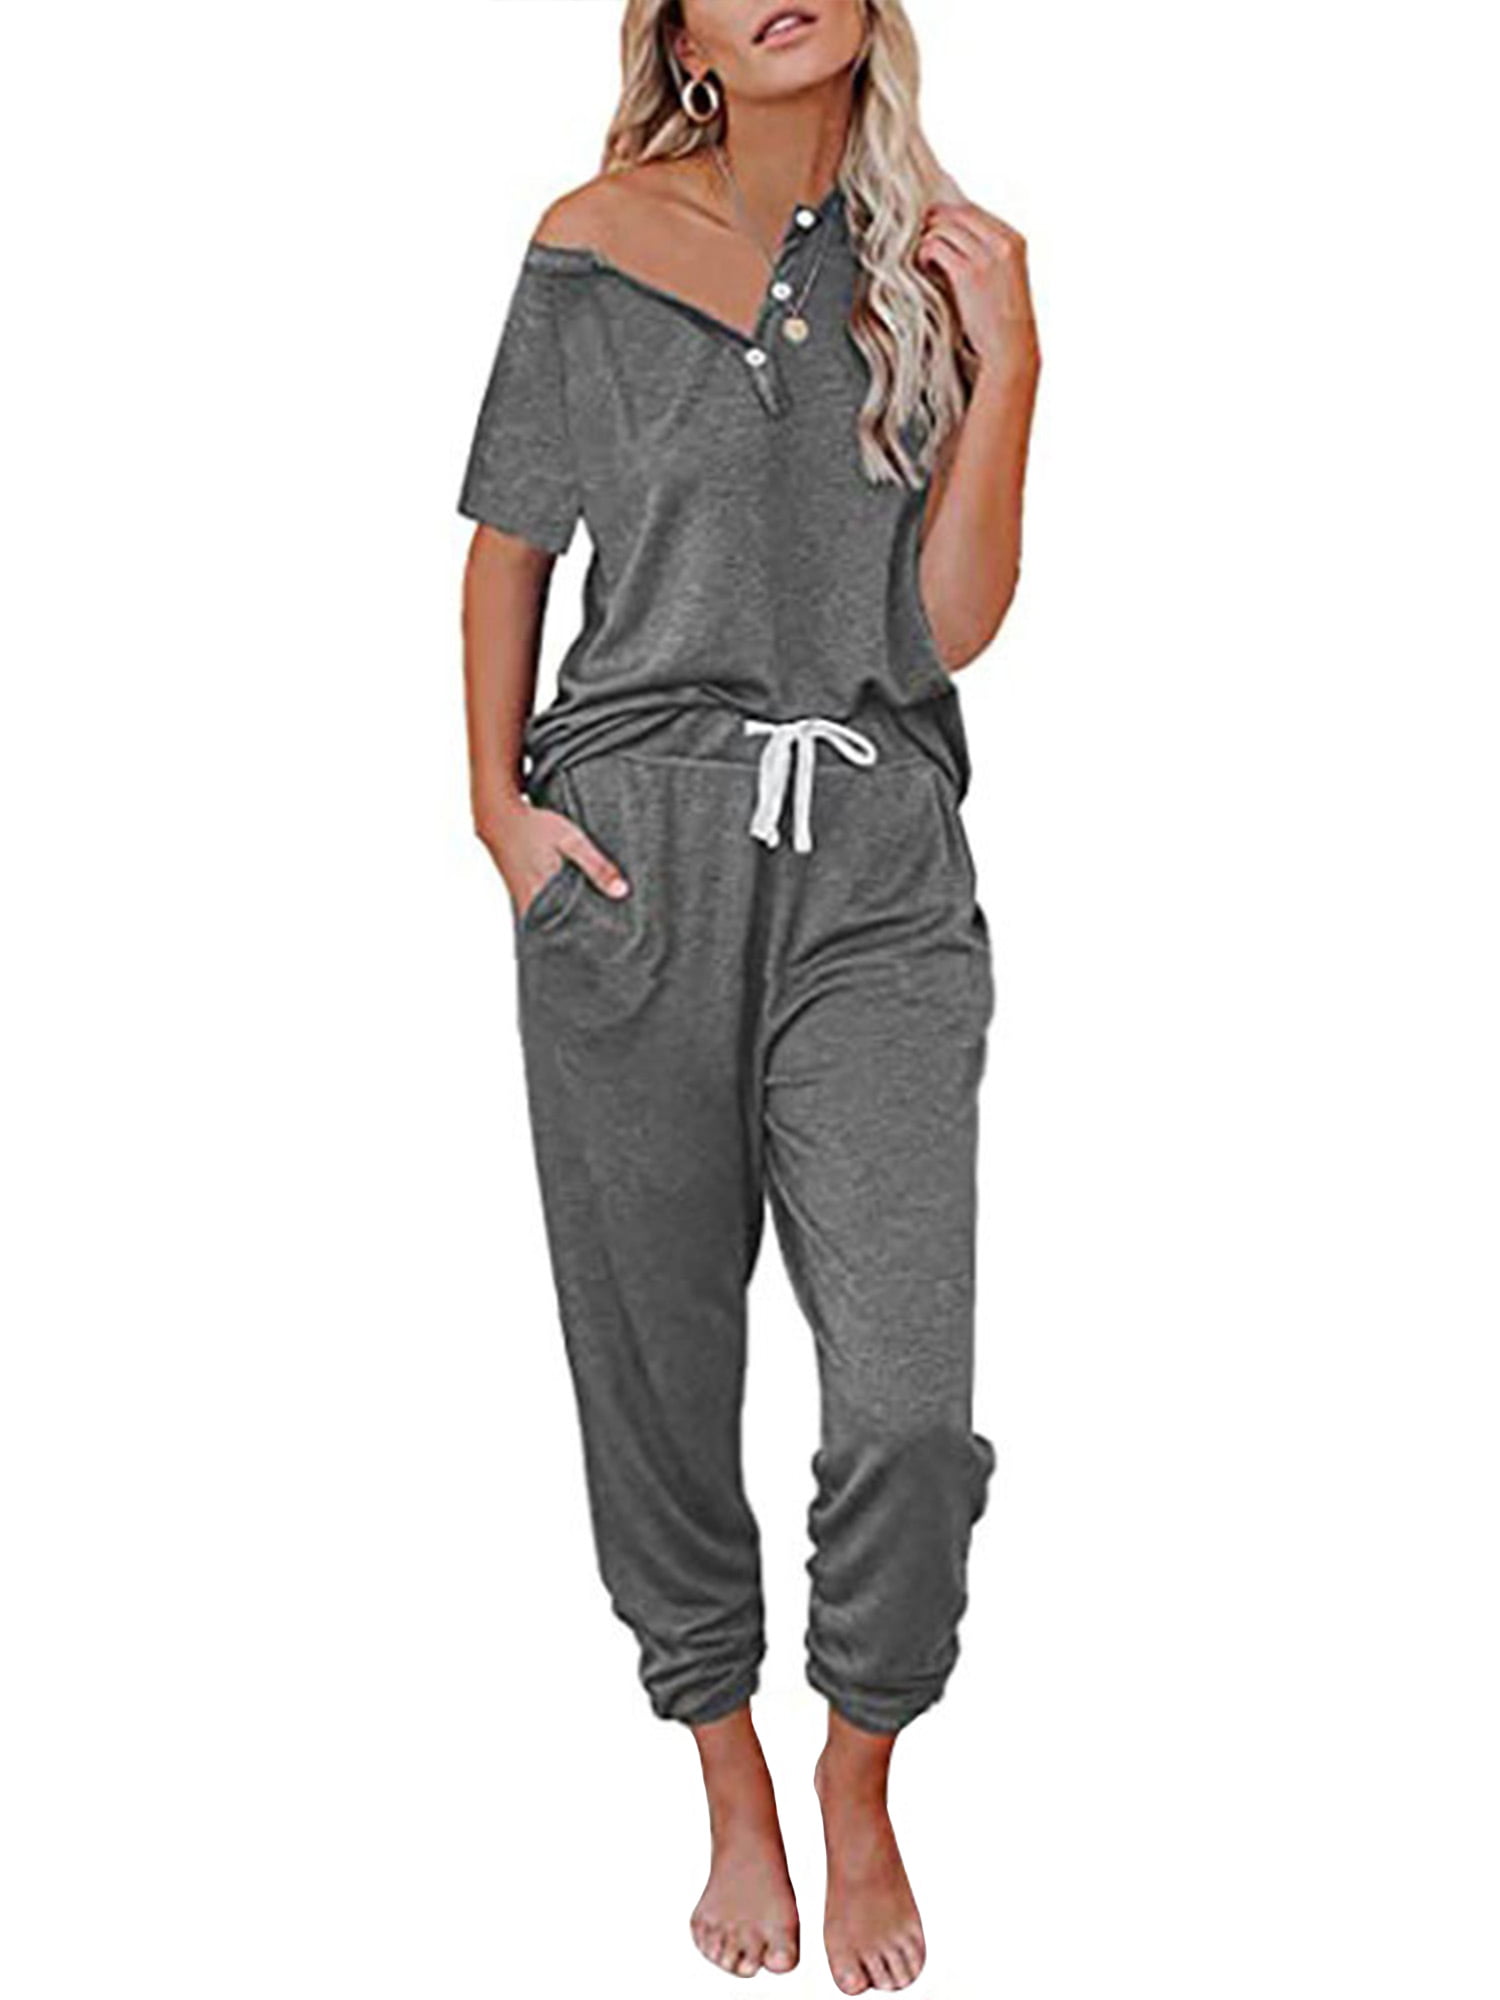 3/4 Pants Running Jogger Tracksuit Set Womens Ladies Contrast Panel 2 Pieces Pullover Sports Suit Casual Short Sleeve Hooded Tops